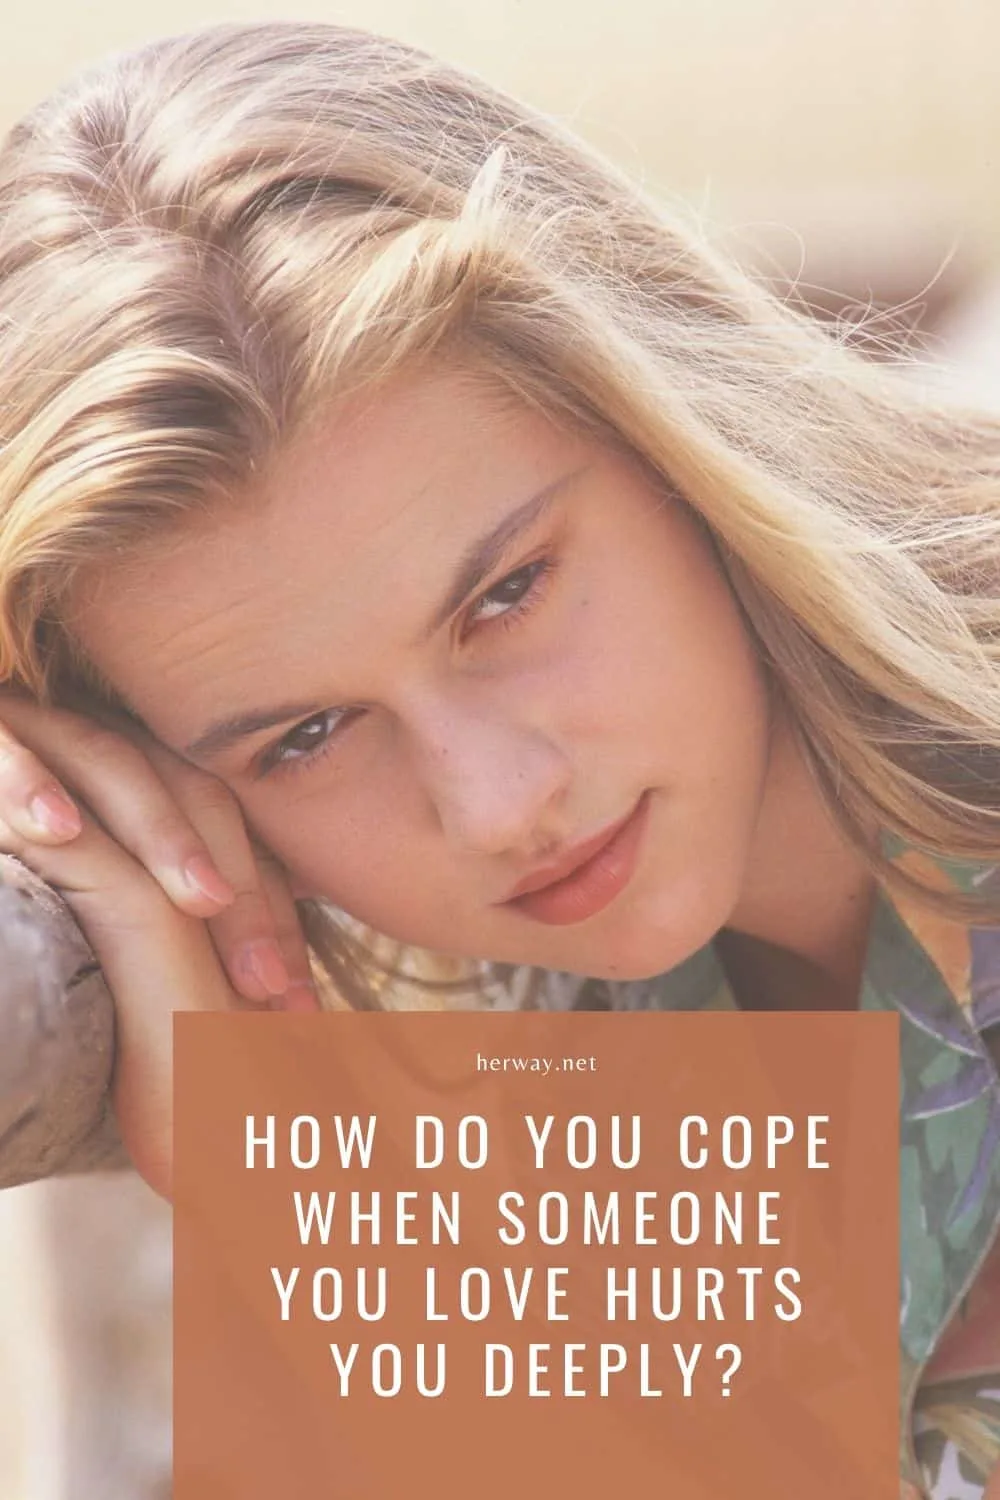 HOW DO YOU COPE WHEN SOMEONE YOU LOVE HURTS YOU DEEPLY?